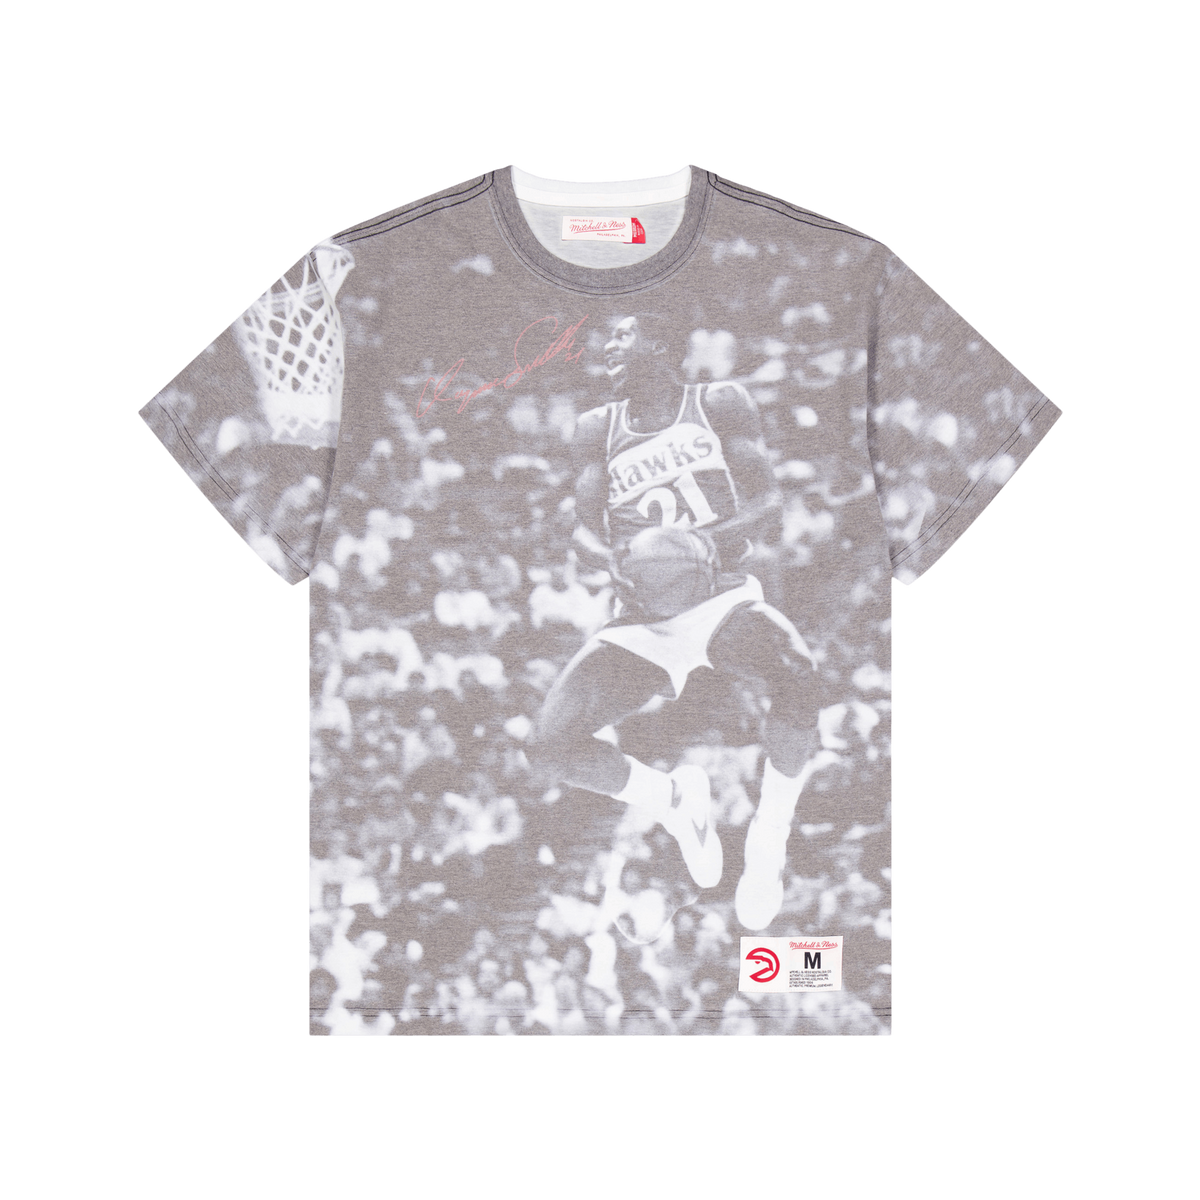 Sublimated S/s Tee - Dominique White